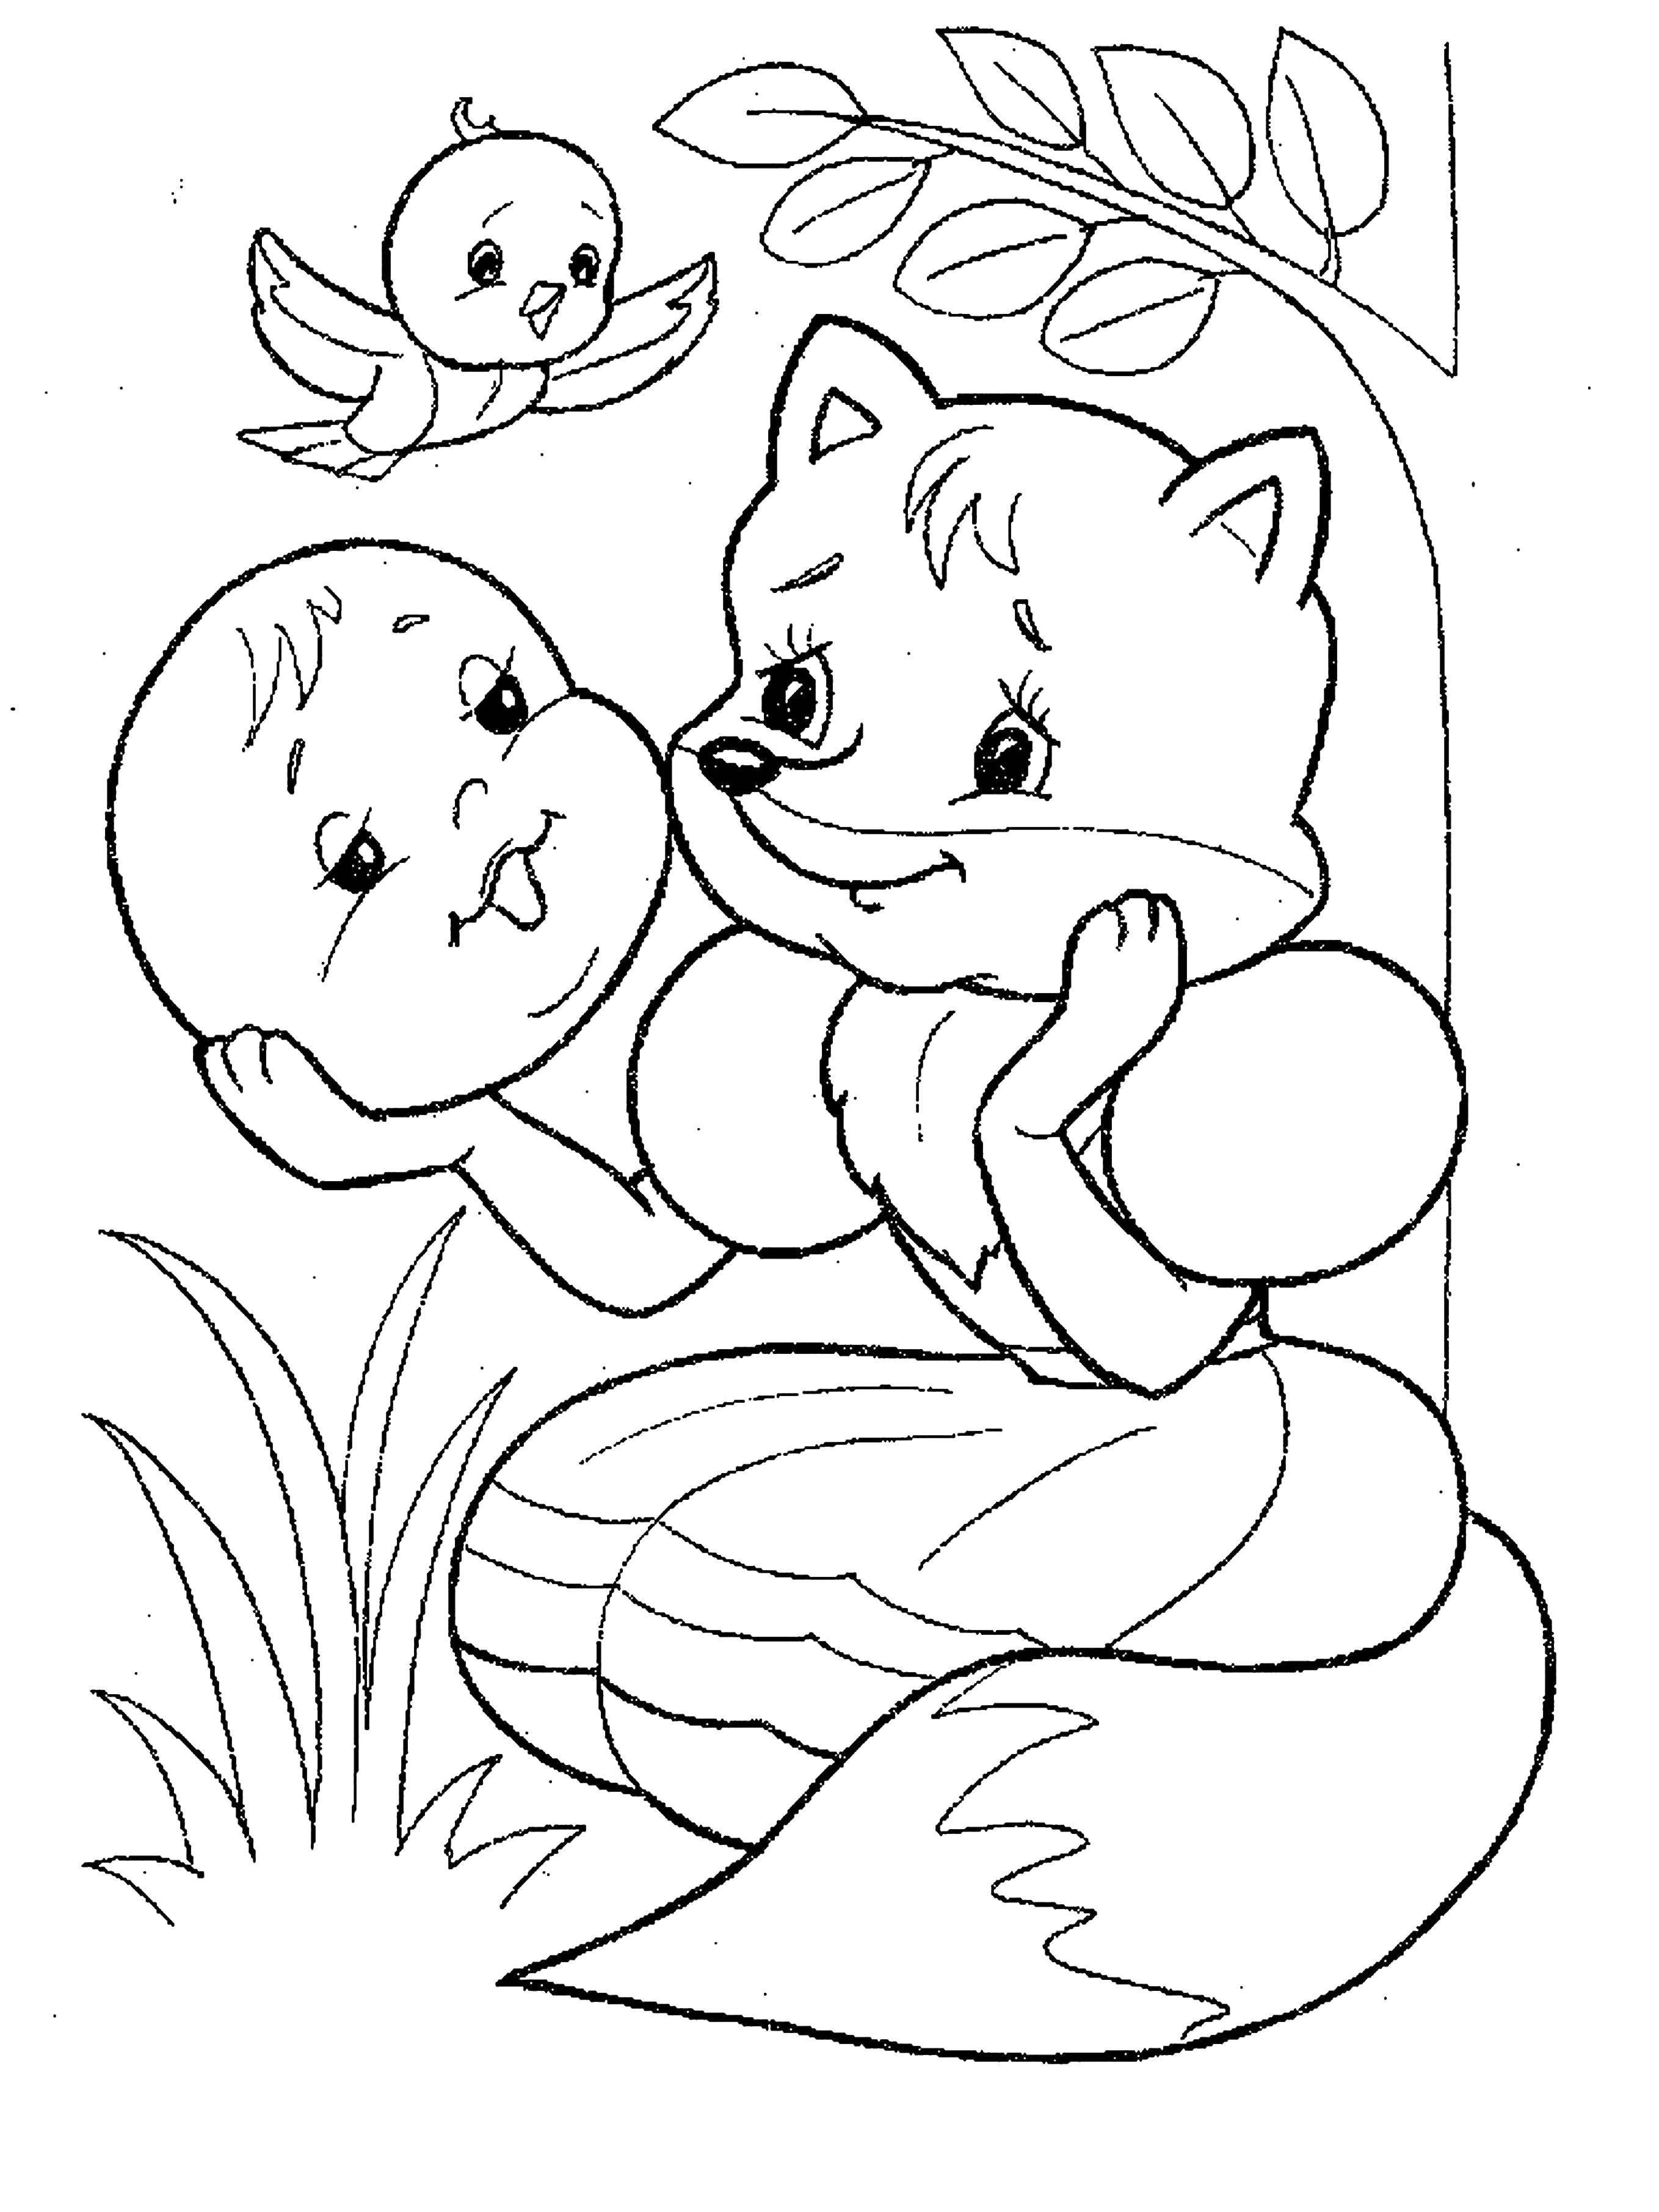 Coloring The gingerbread man and the Fox. Category gingerbread man . Tags:  Fairy Tales, Gingerbread Man.